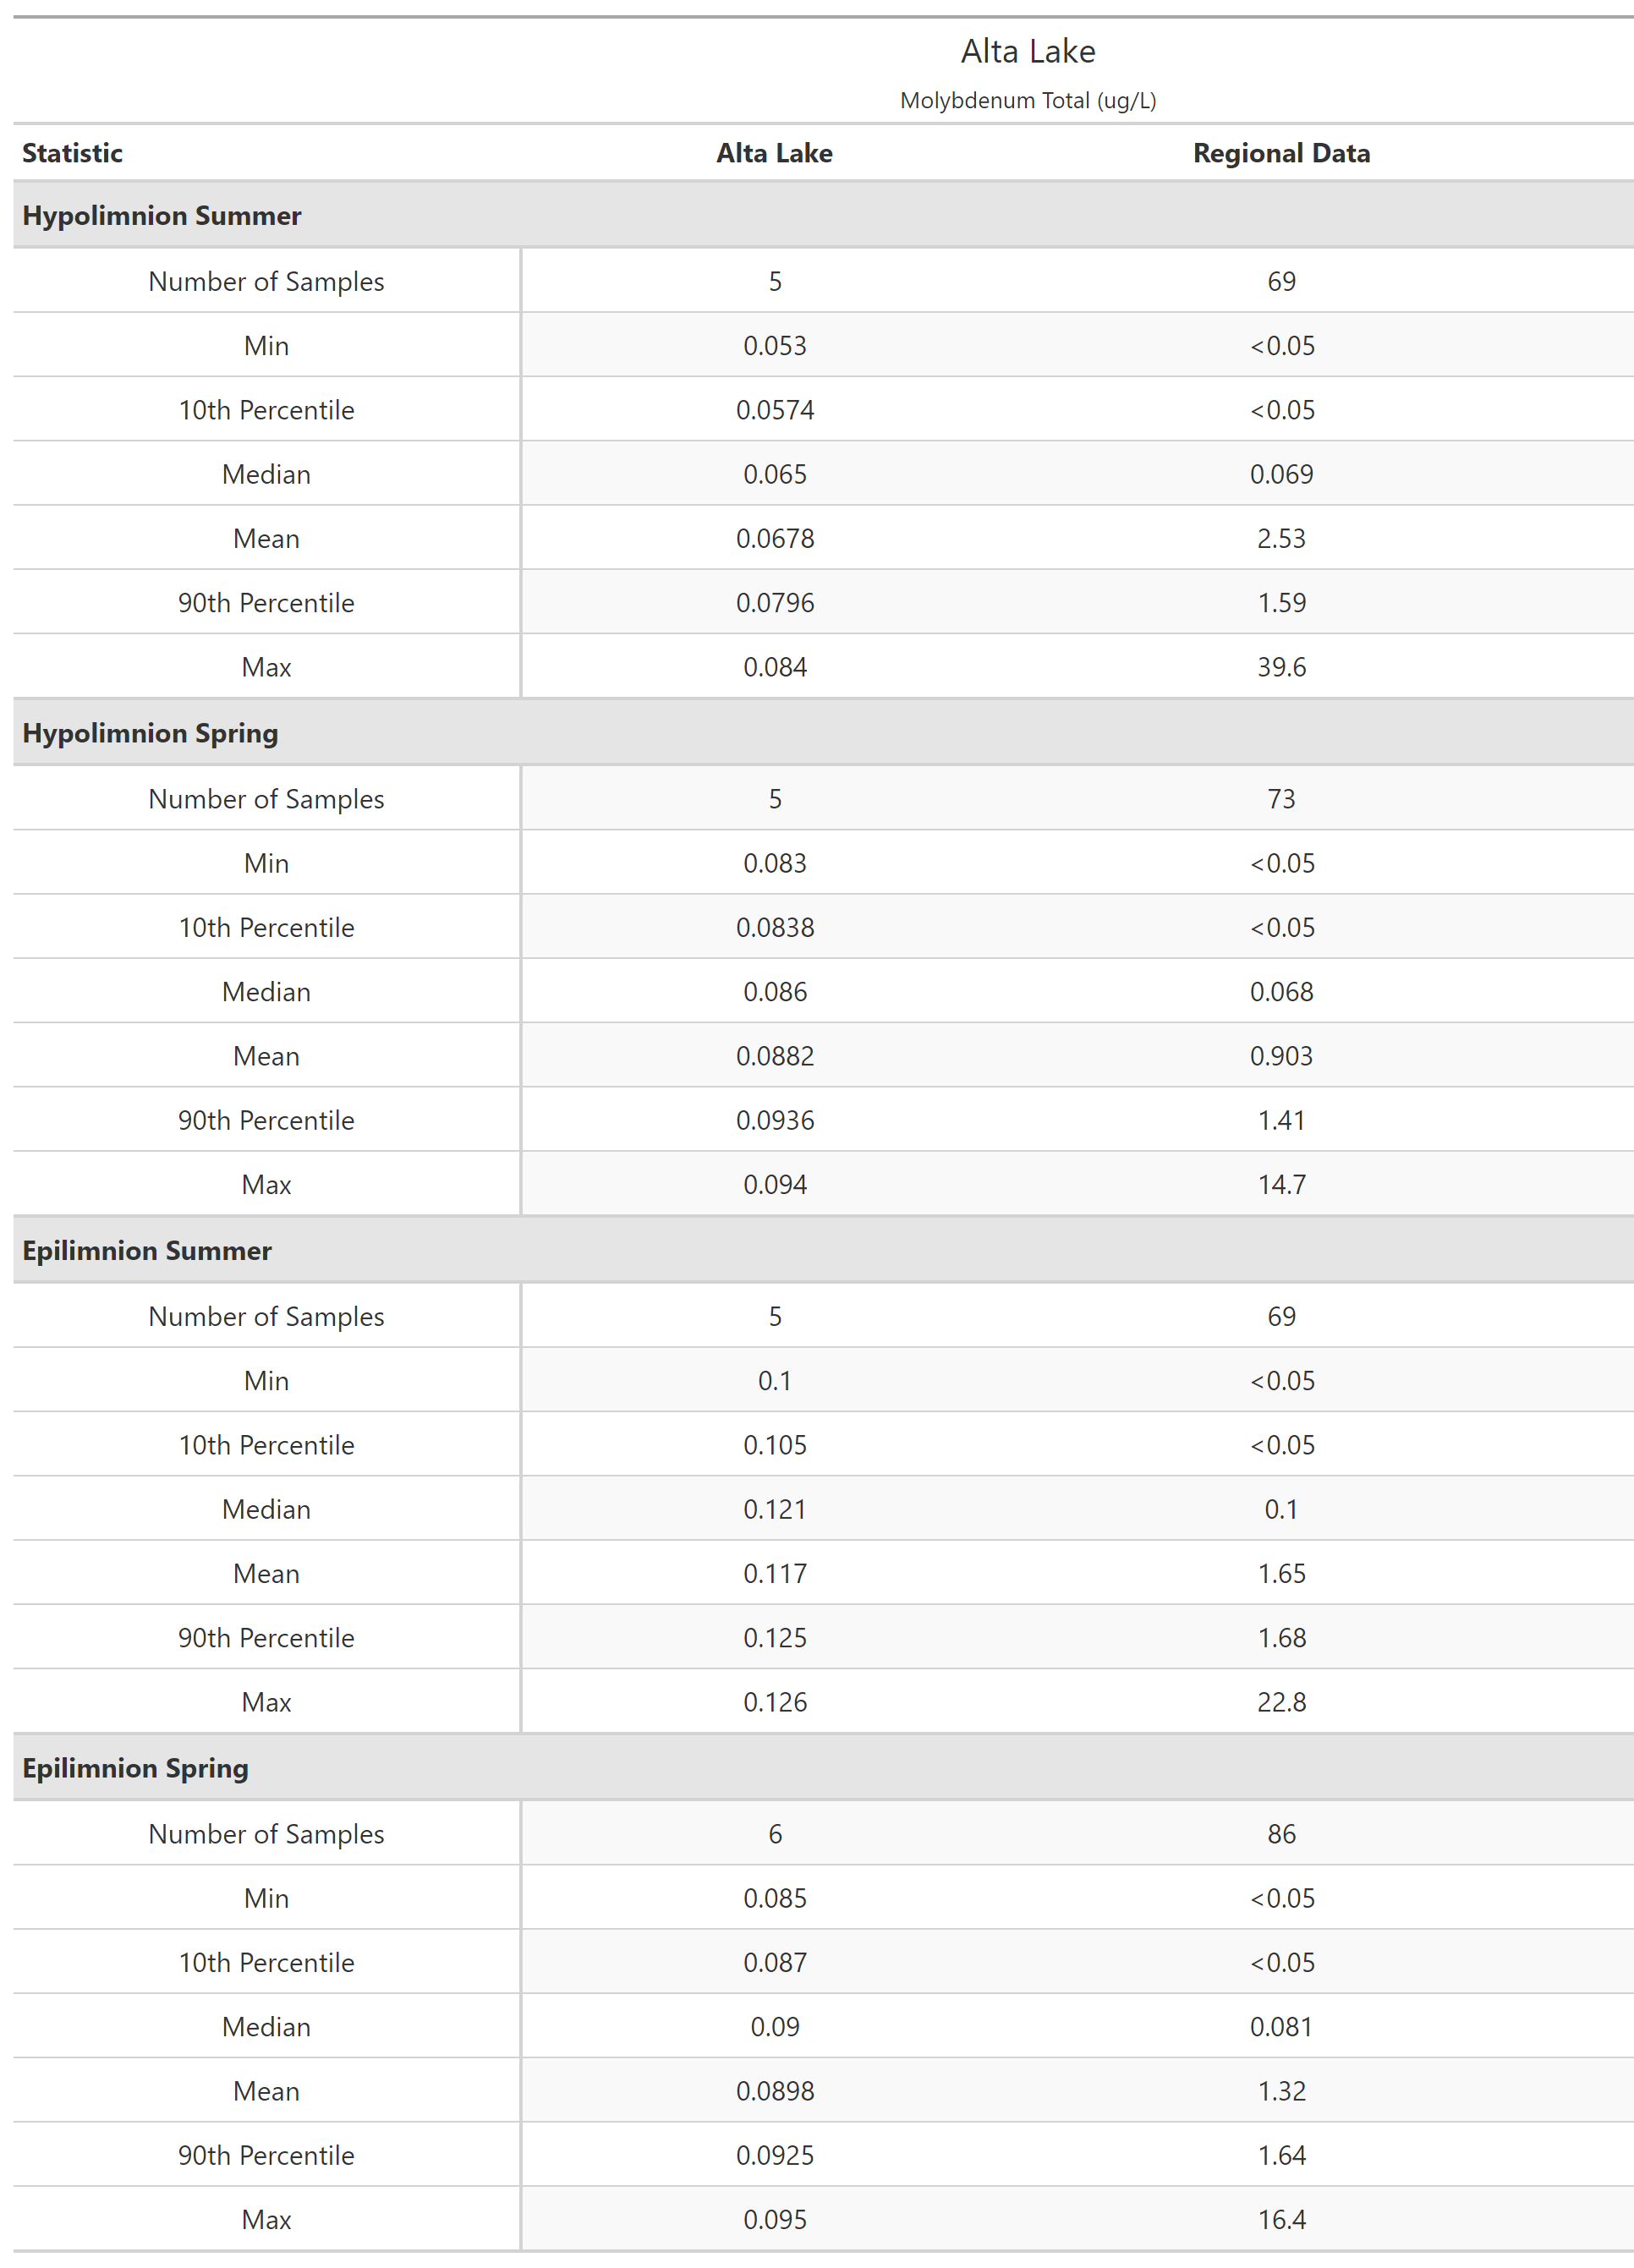 A table of summary statistics for Molybdenum Total with comparison to regional data